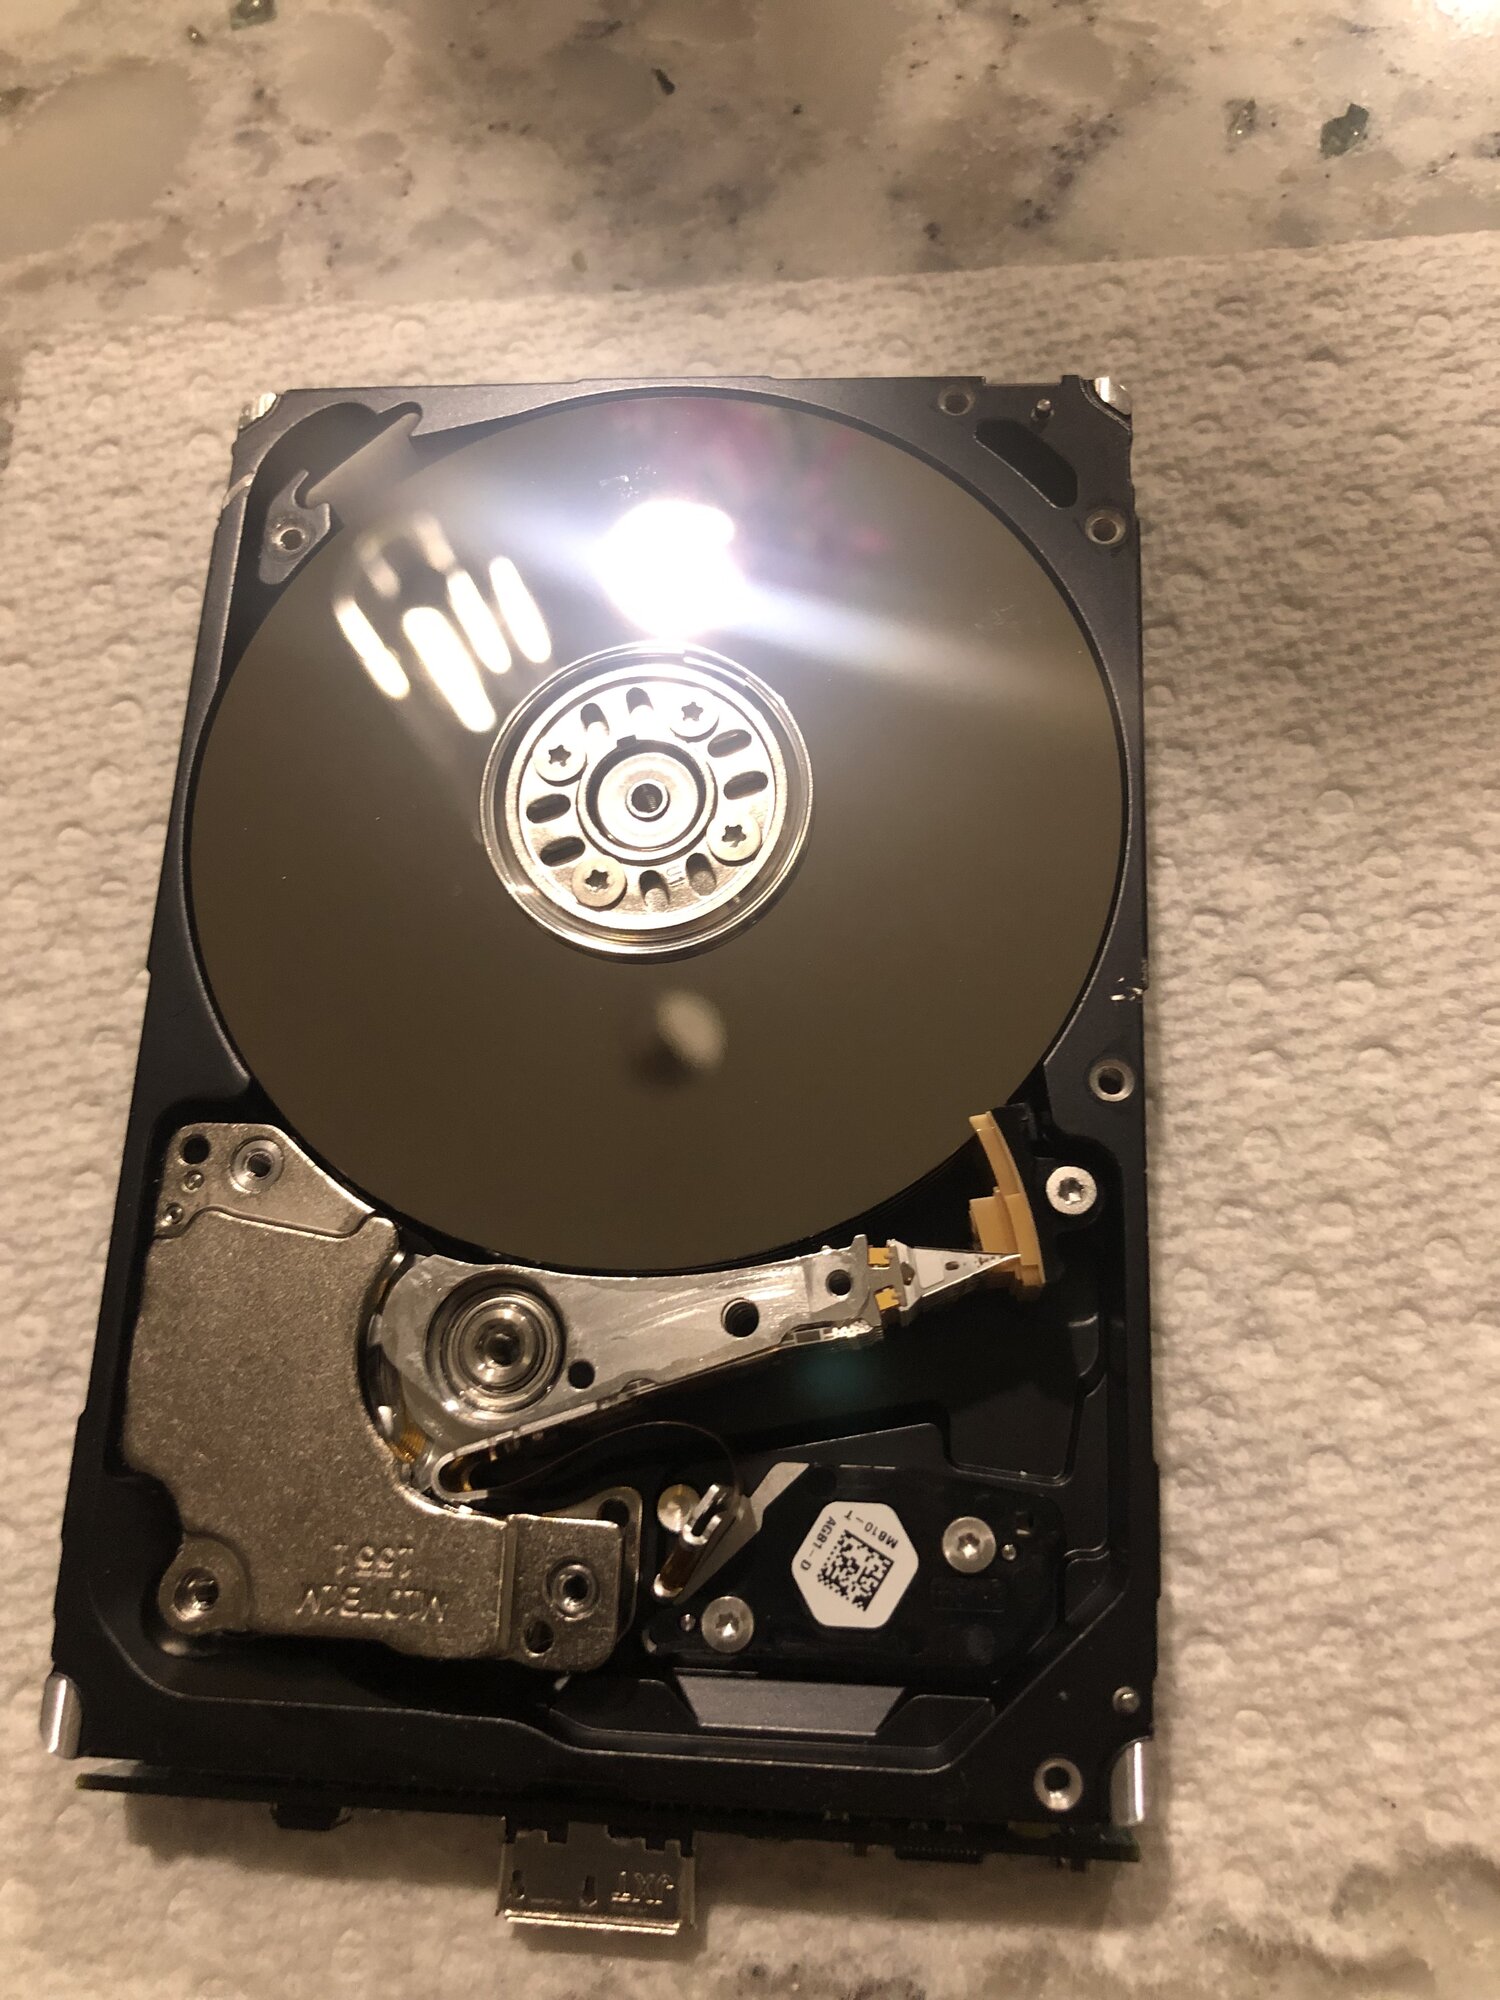 seagate external hard drive keeps disconnecting